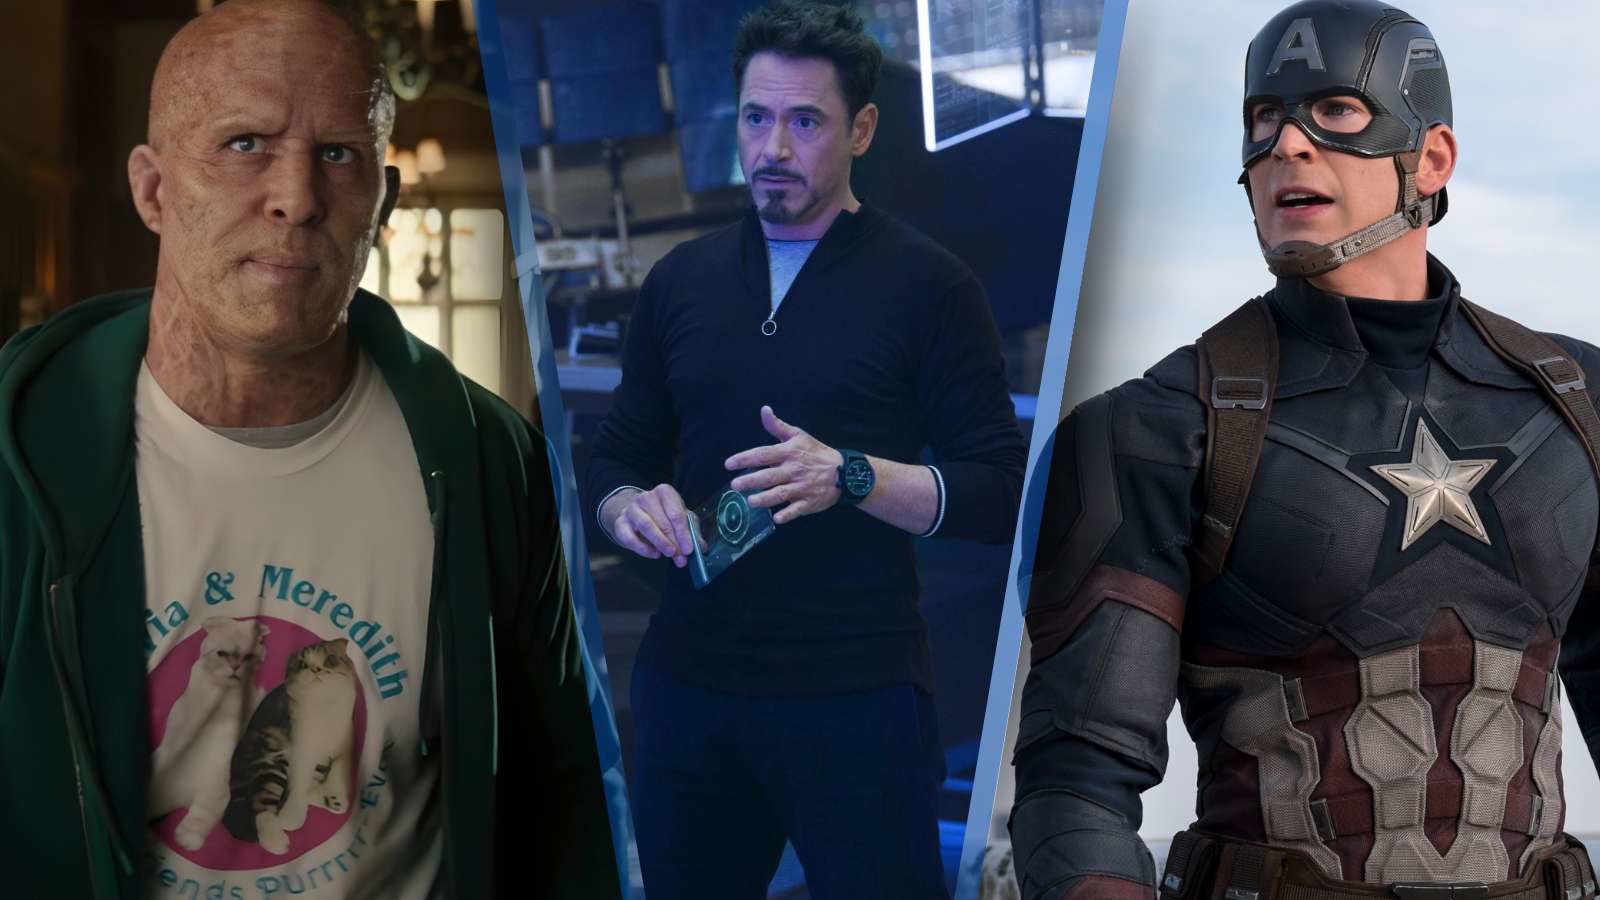 Robert Downey Jr. Outshines Ryan Reynolds and Chris Evans’ Hilarious Deadpool 3 Post-Credits Scene in a Forgotten 1993 Documentary